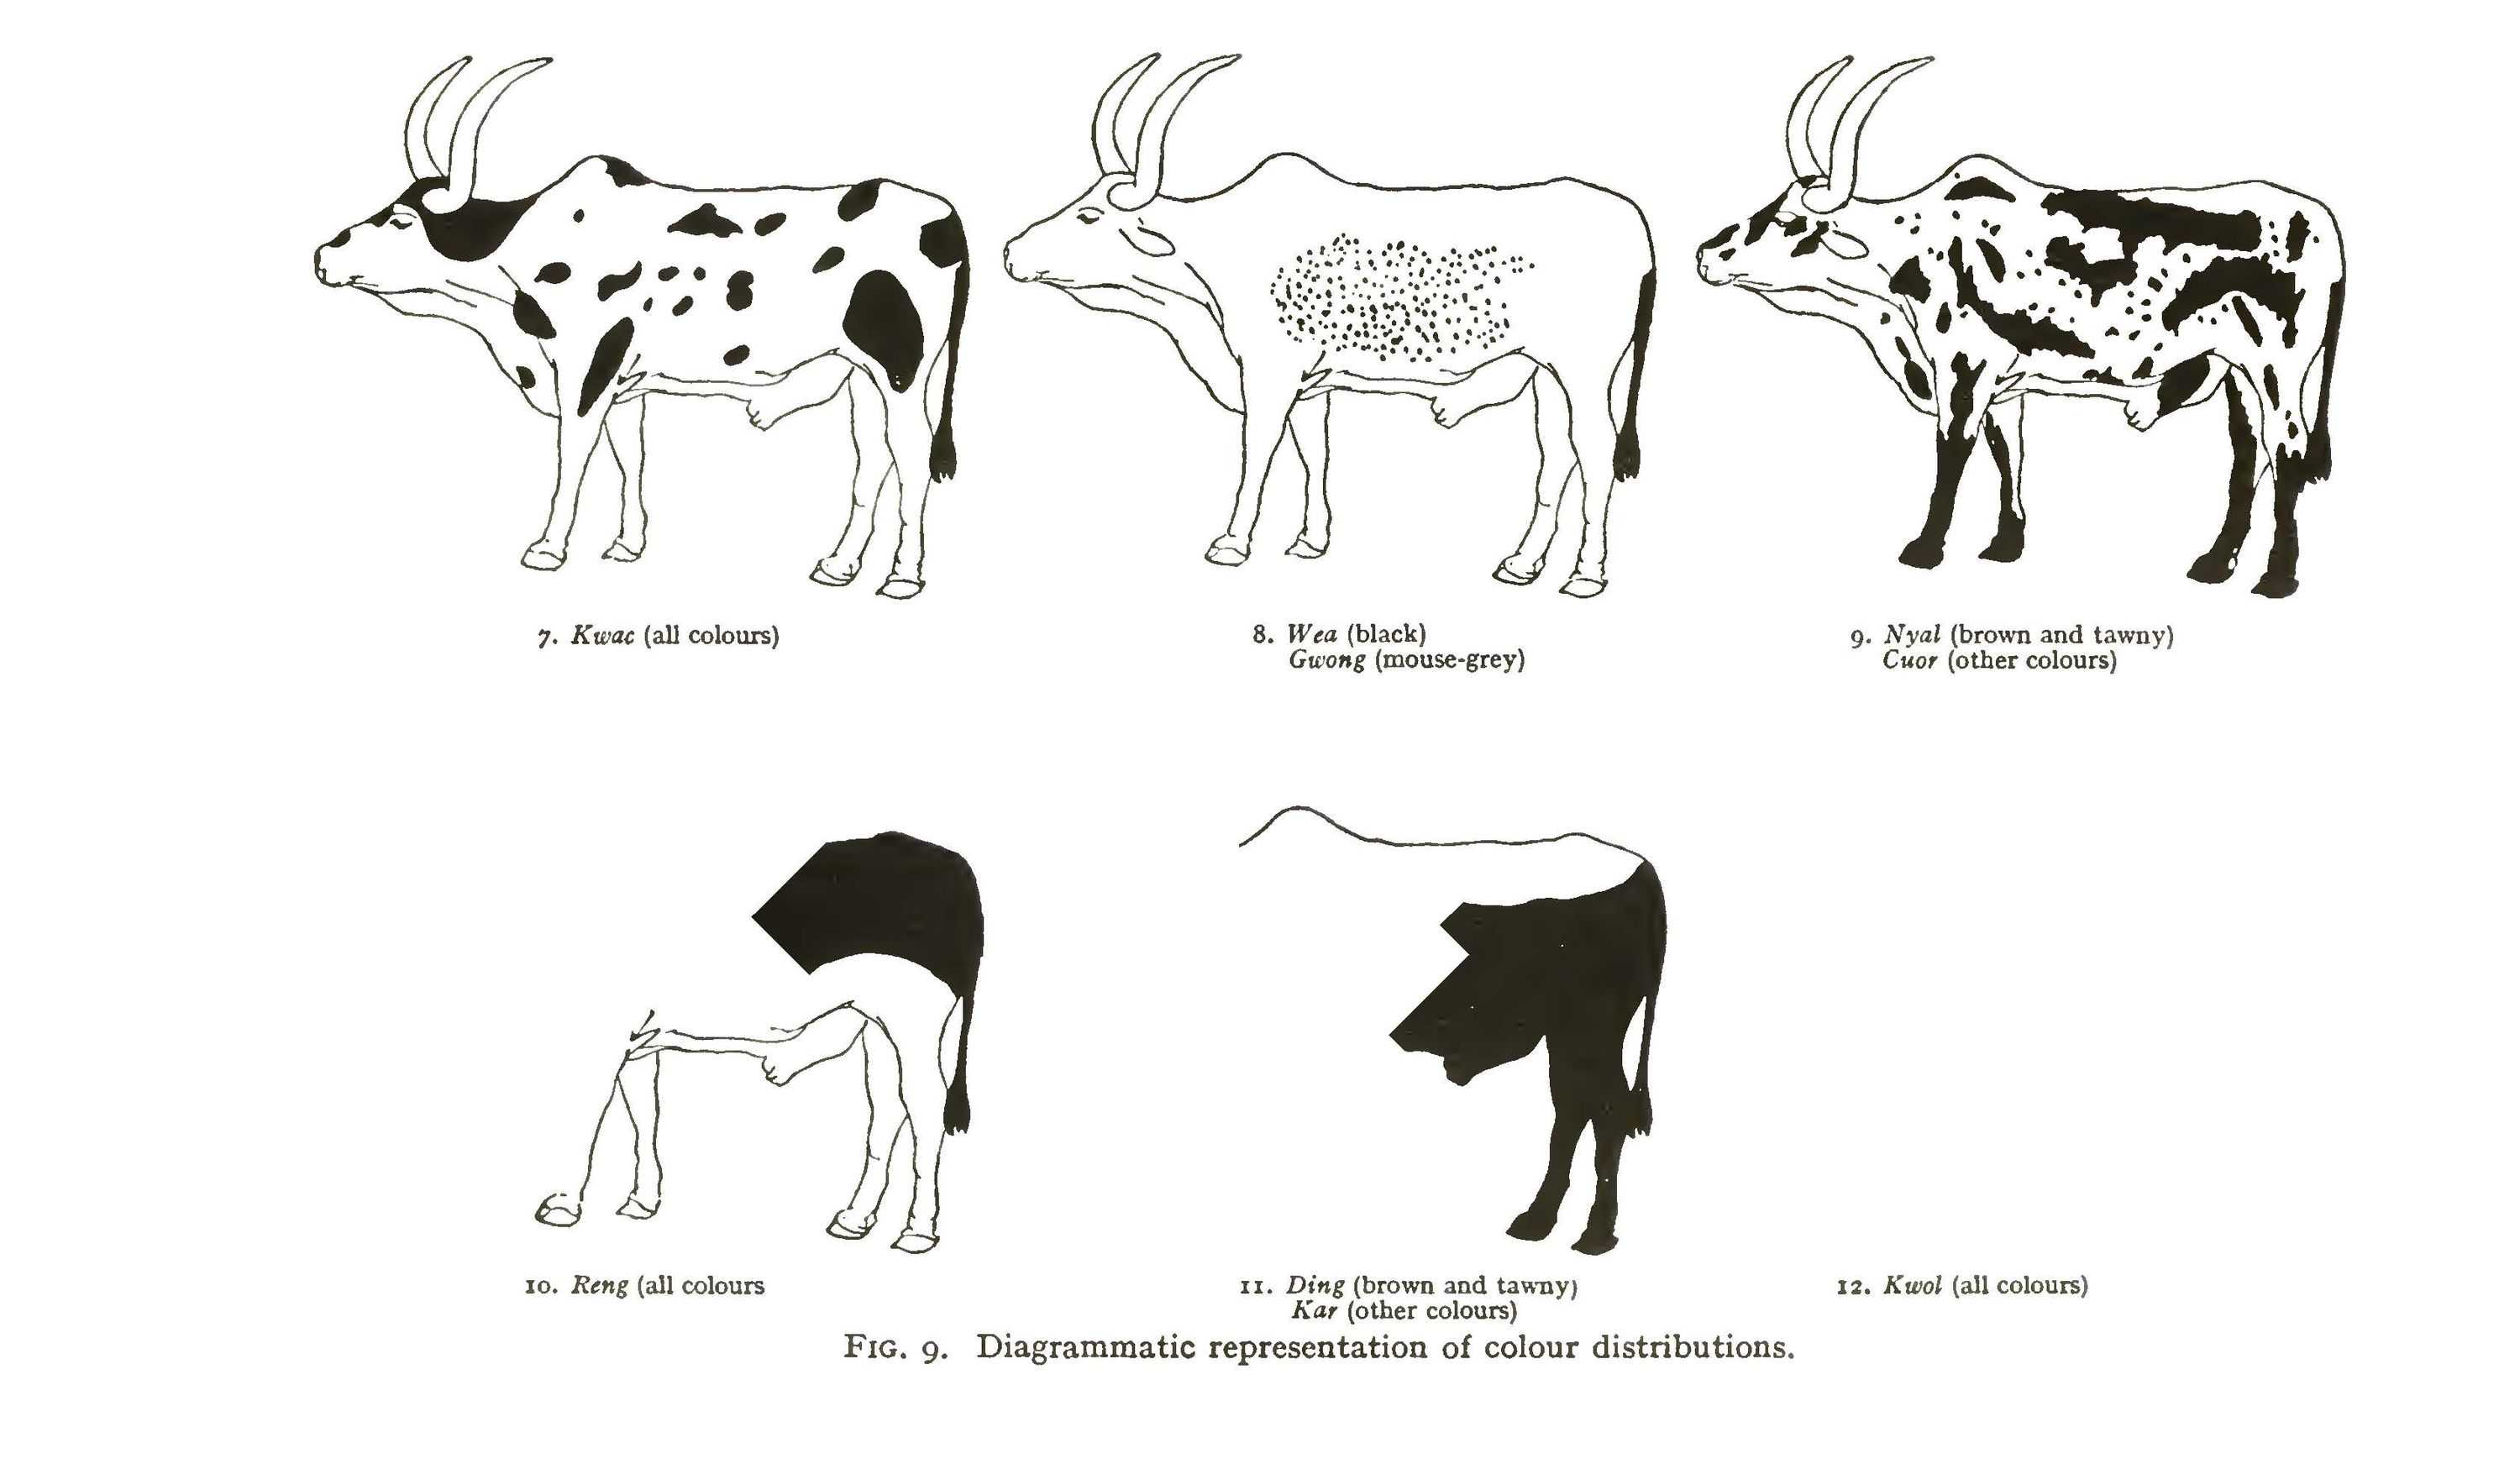 evans-pritchard - types of cow color patterns 2 - cool